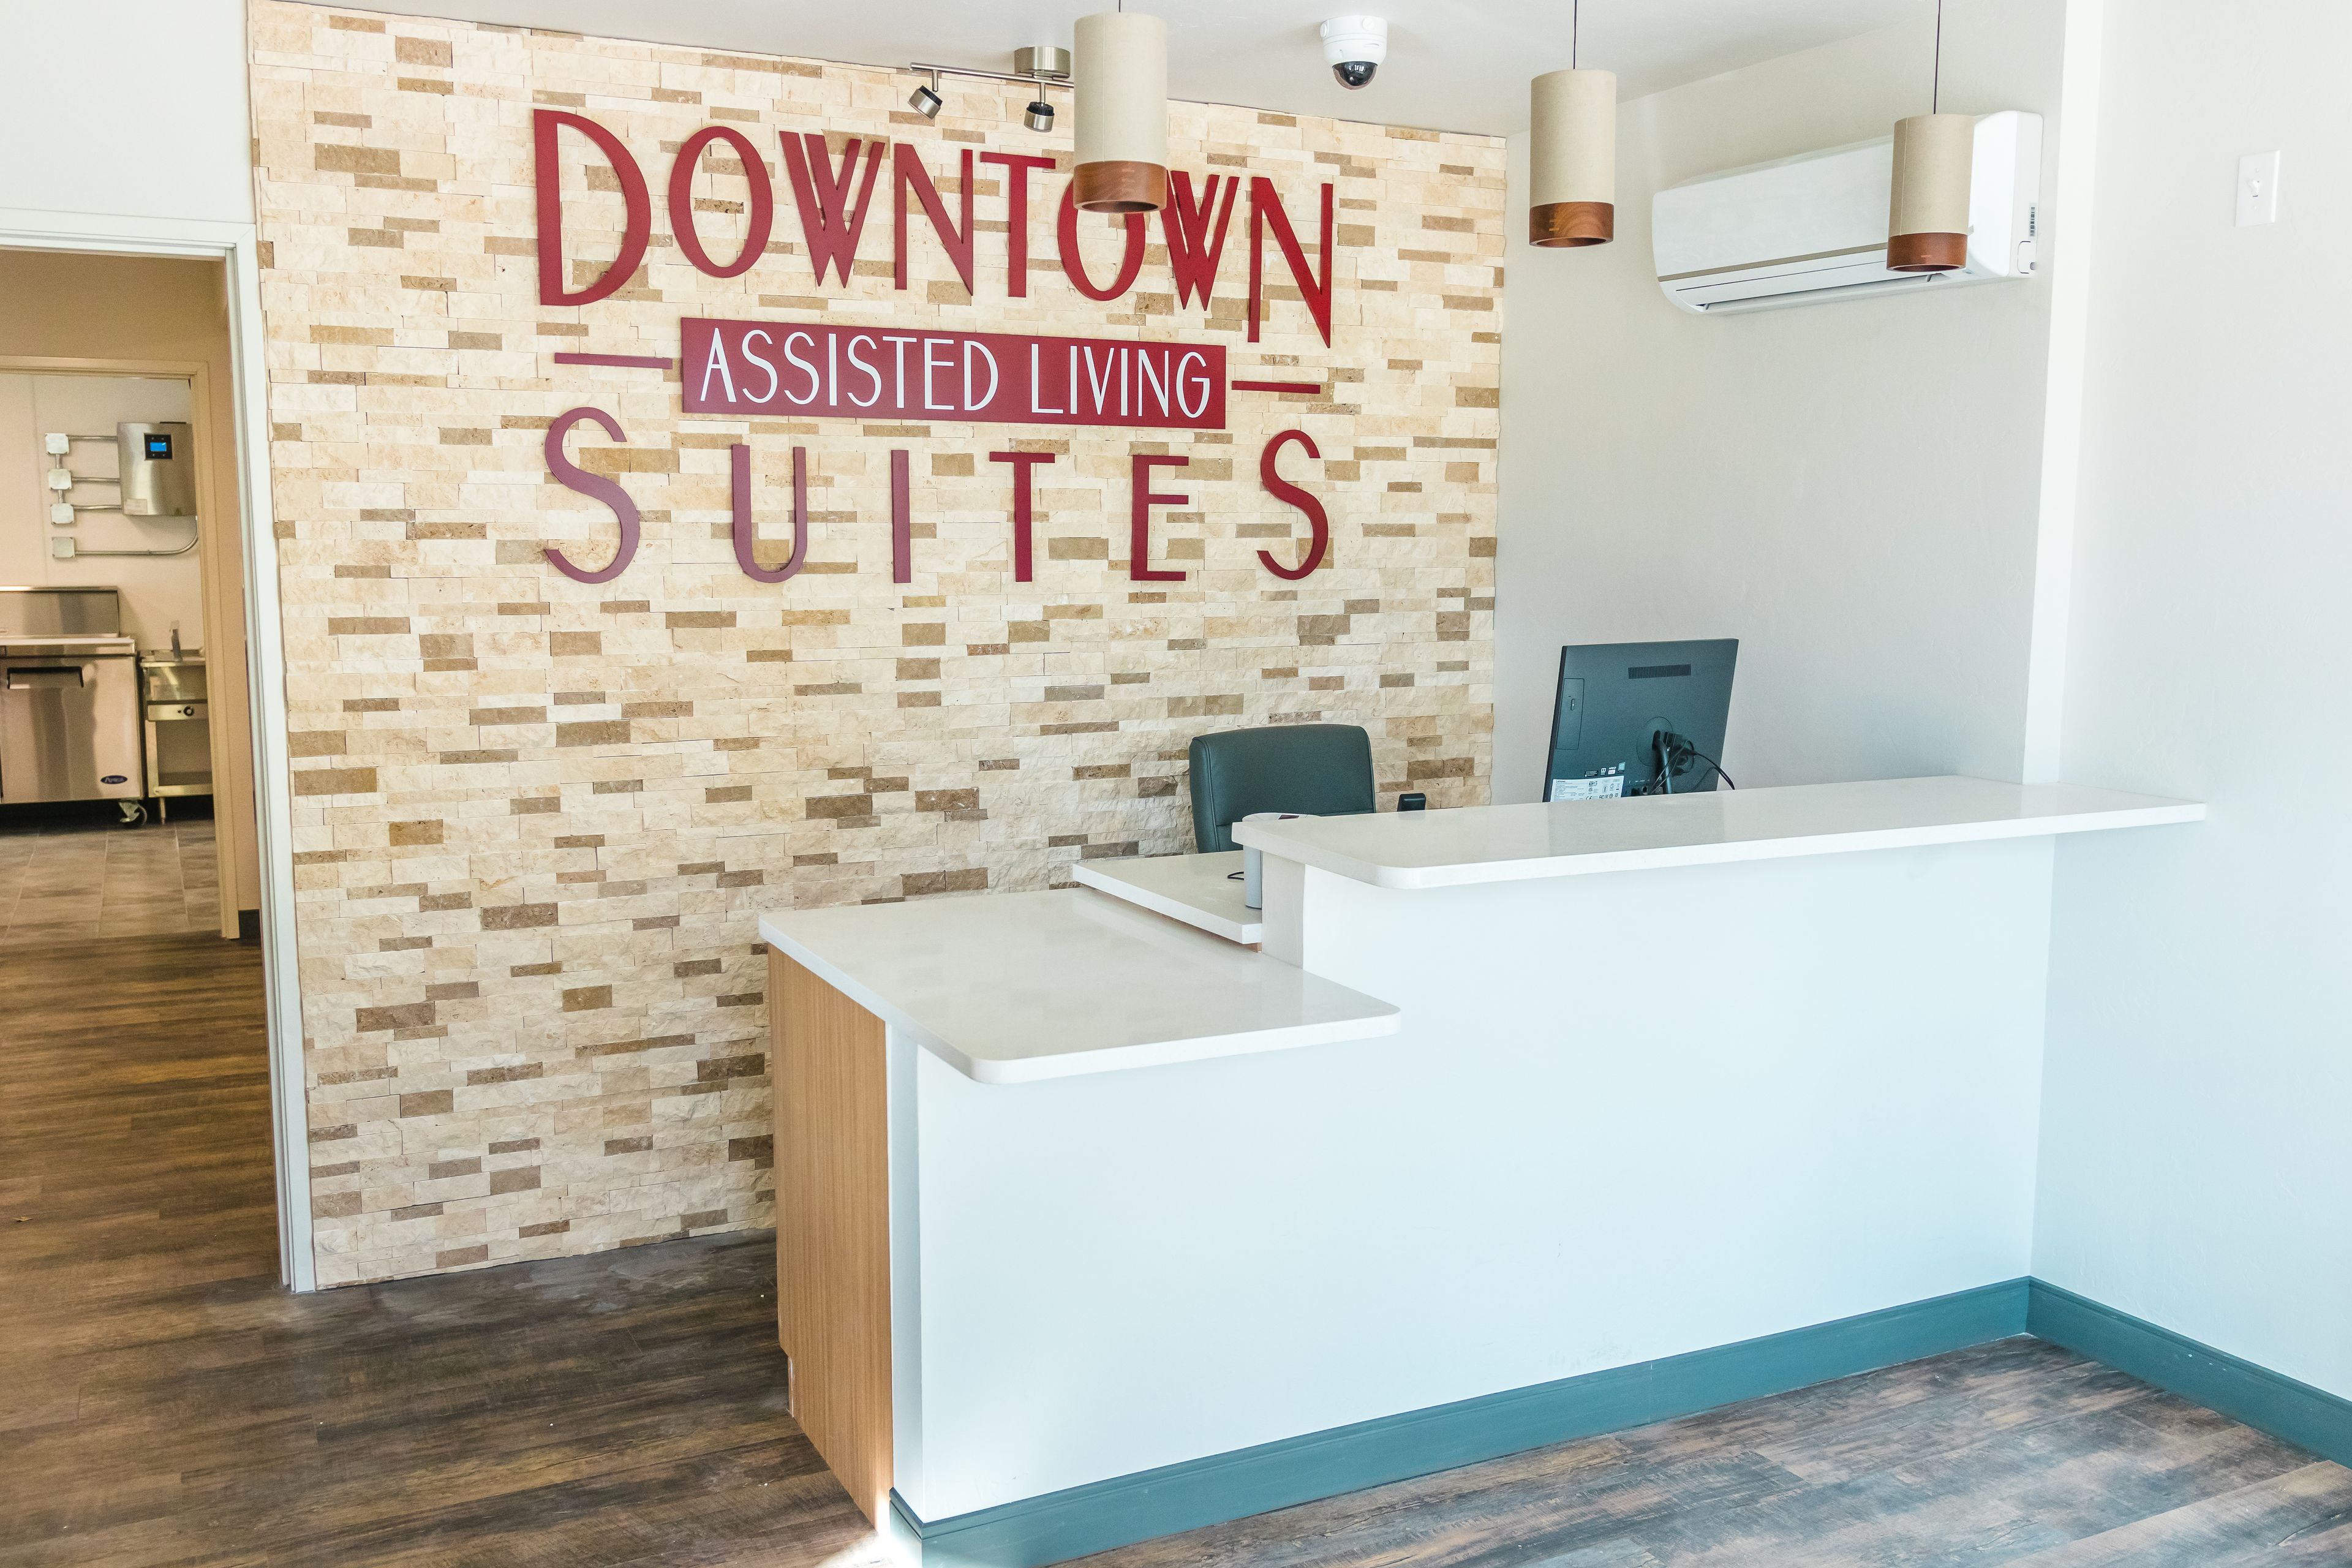 Downtown Assisted Living Suites 1